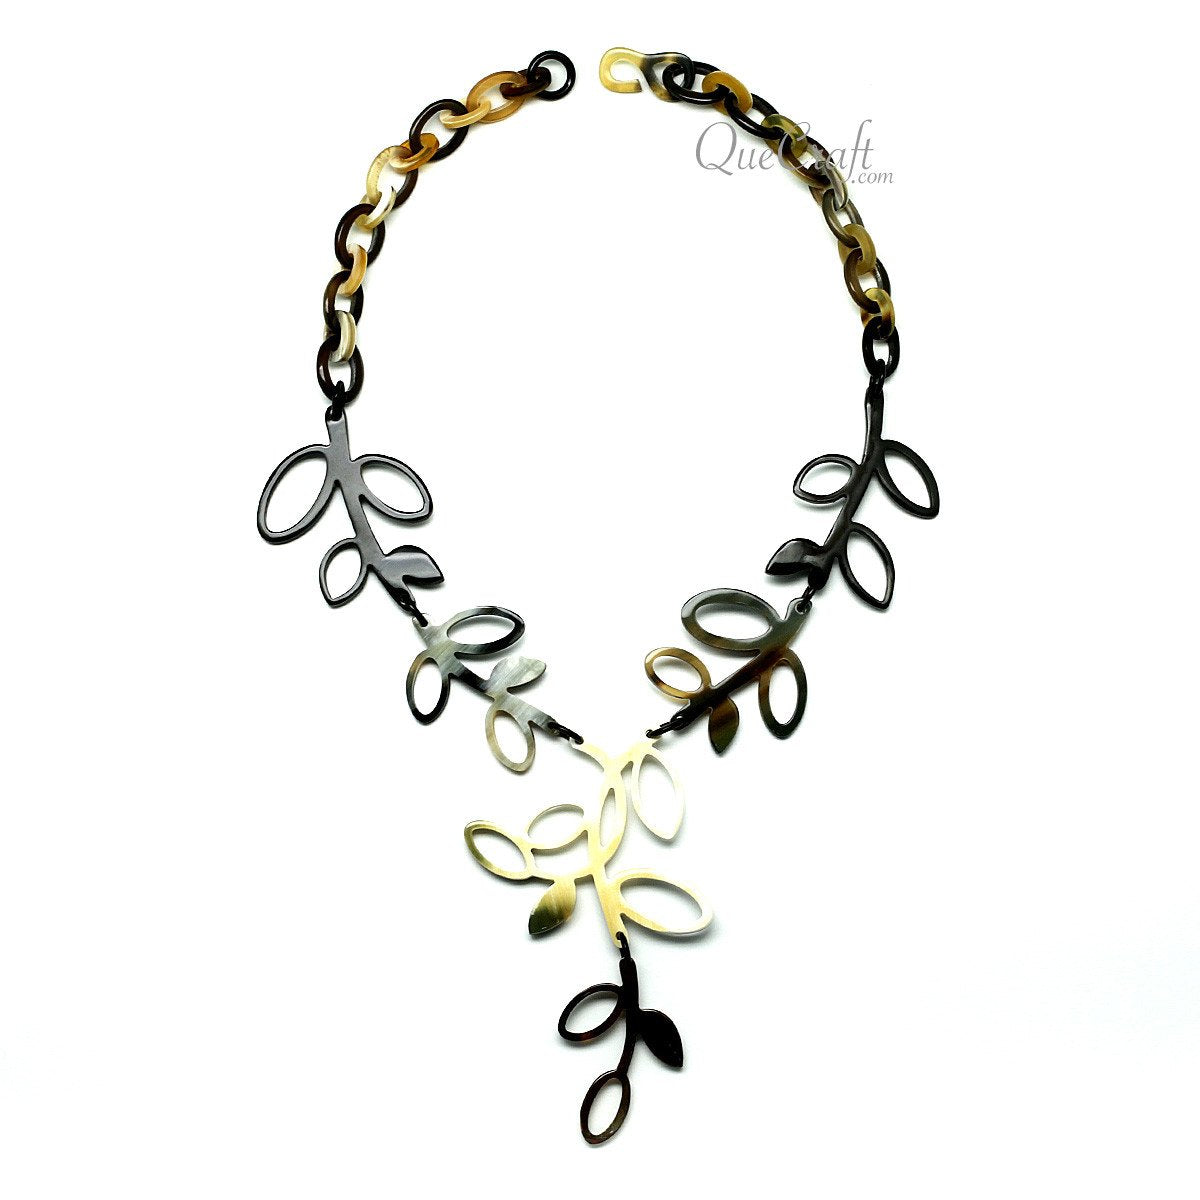 Horn Chain Necklace #11738 - HORN JEWELRY